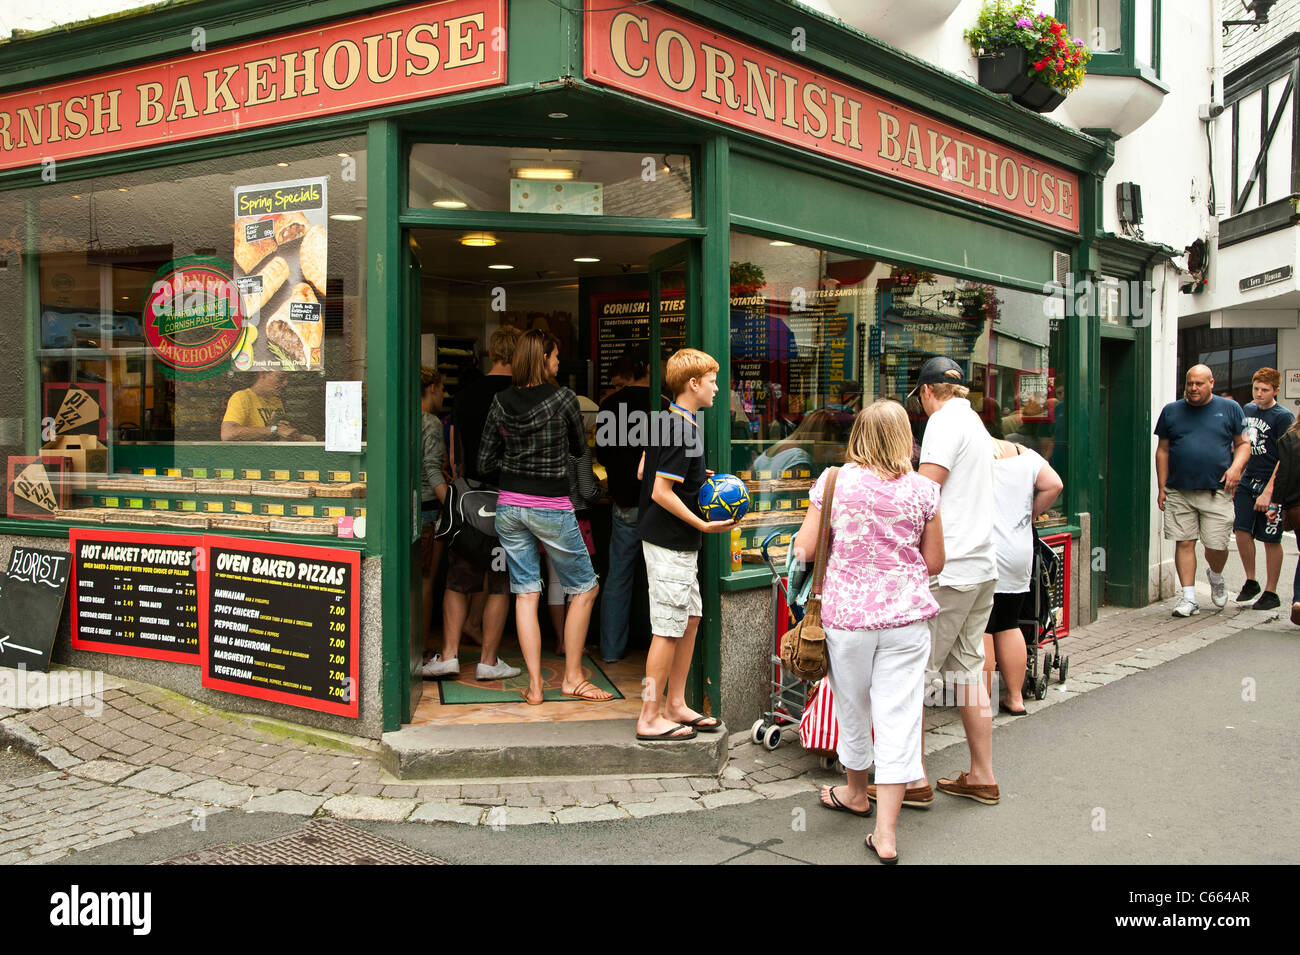 People queuing to buy take-away food at a Cornish pasty shop in Looe, a ...